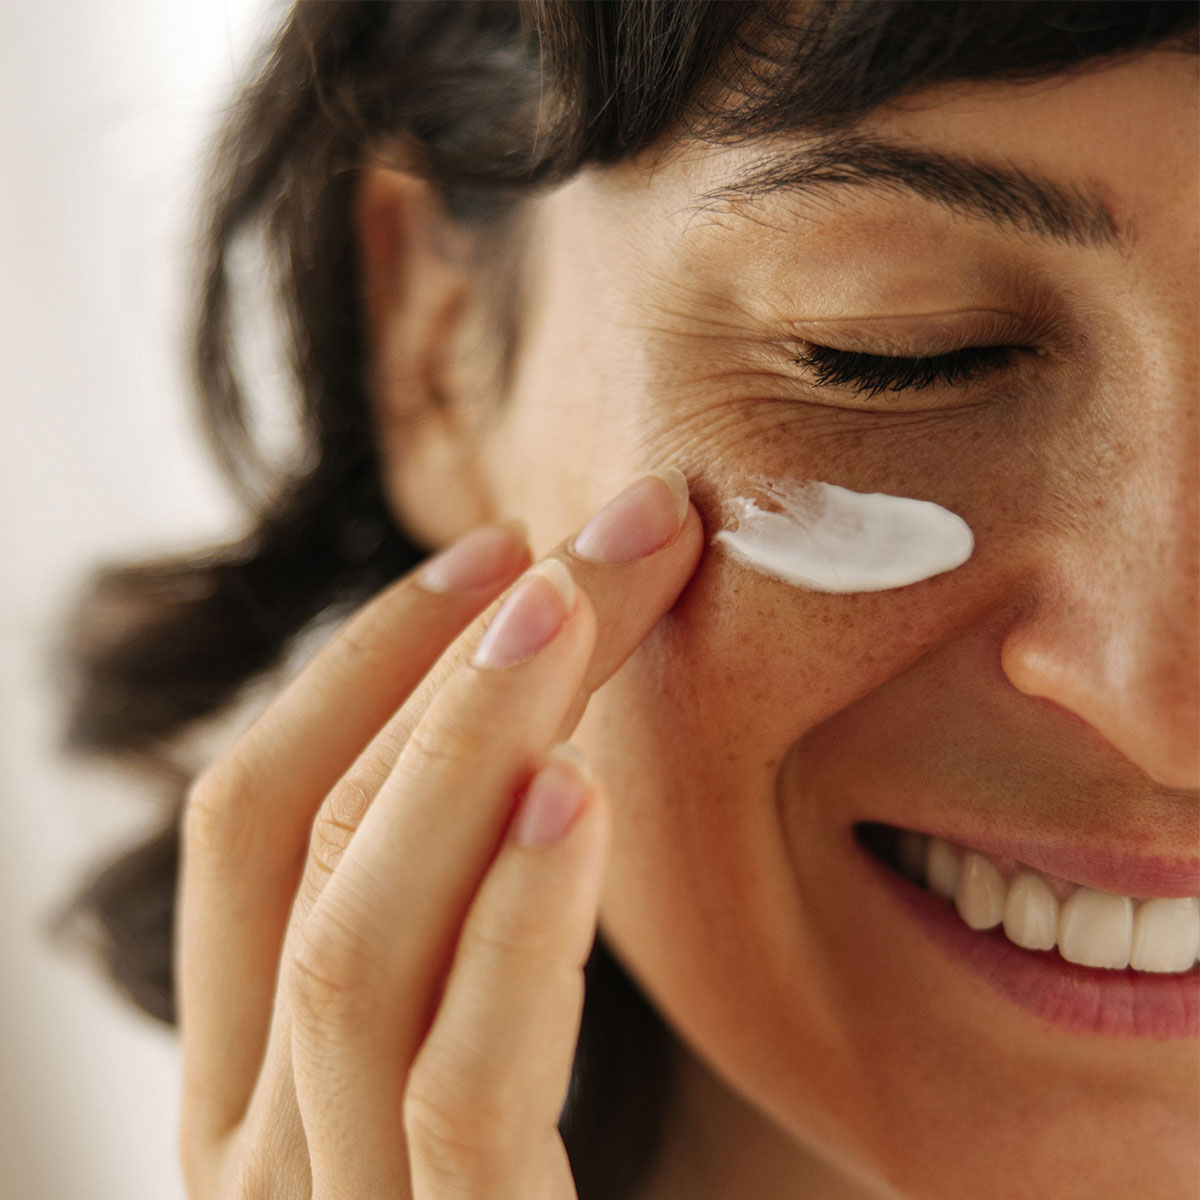 woman smiling and applying white under eye cream to skin with finger